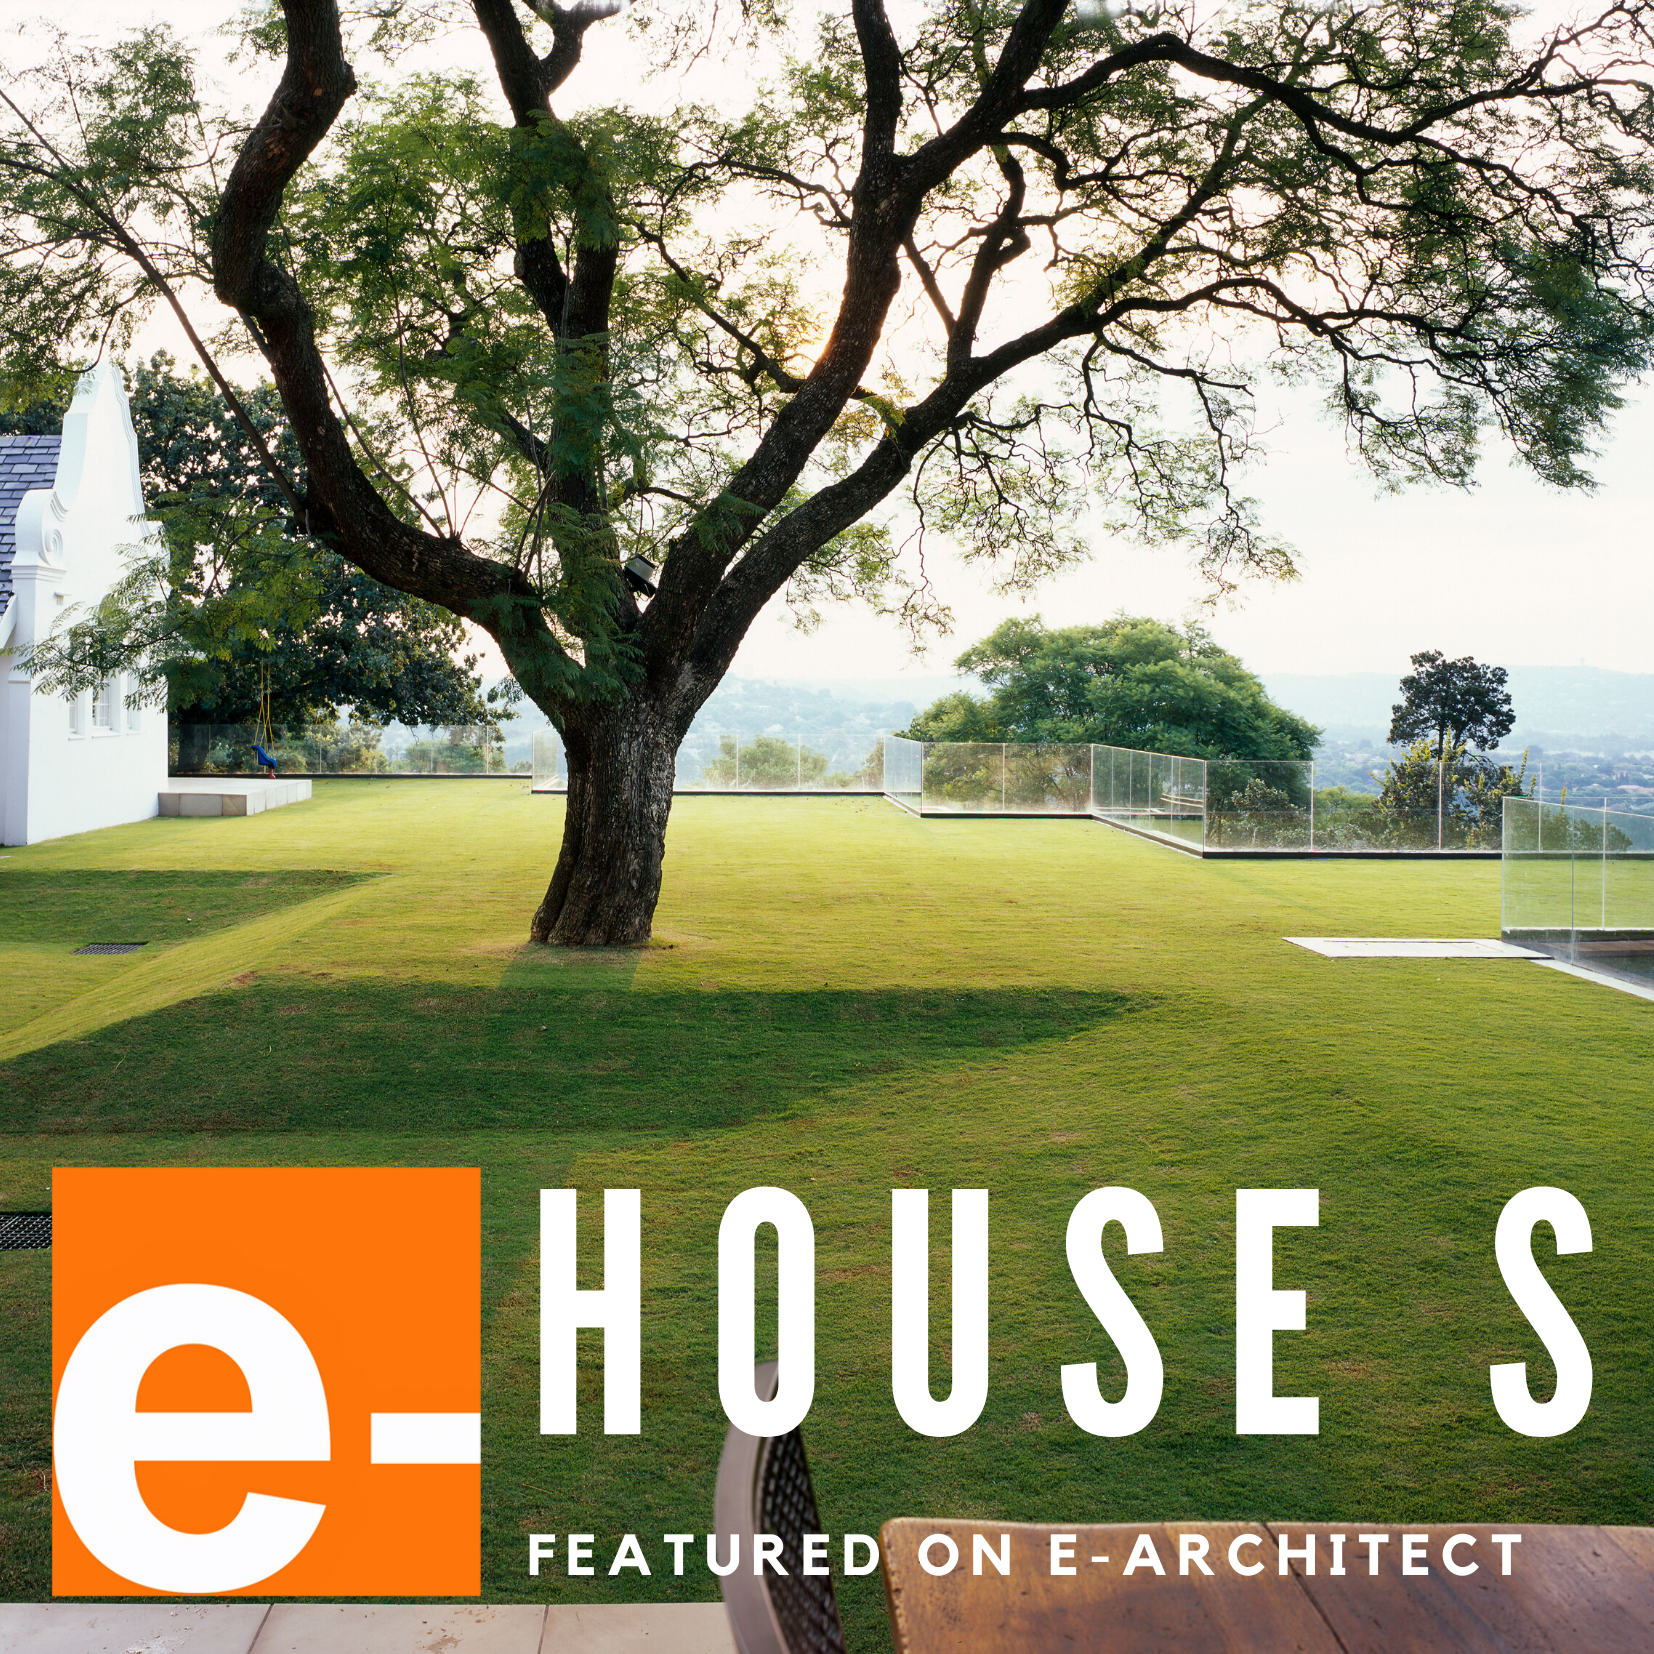 House S, featured on E-Architect 